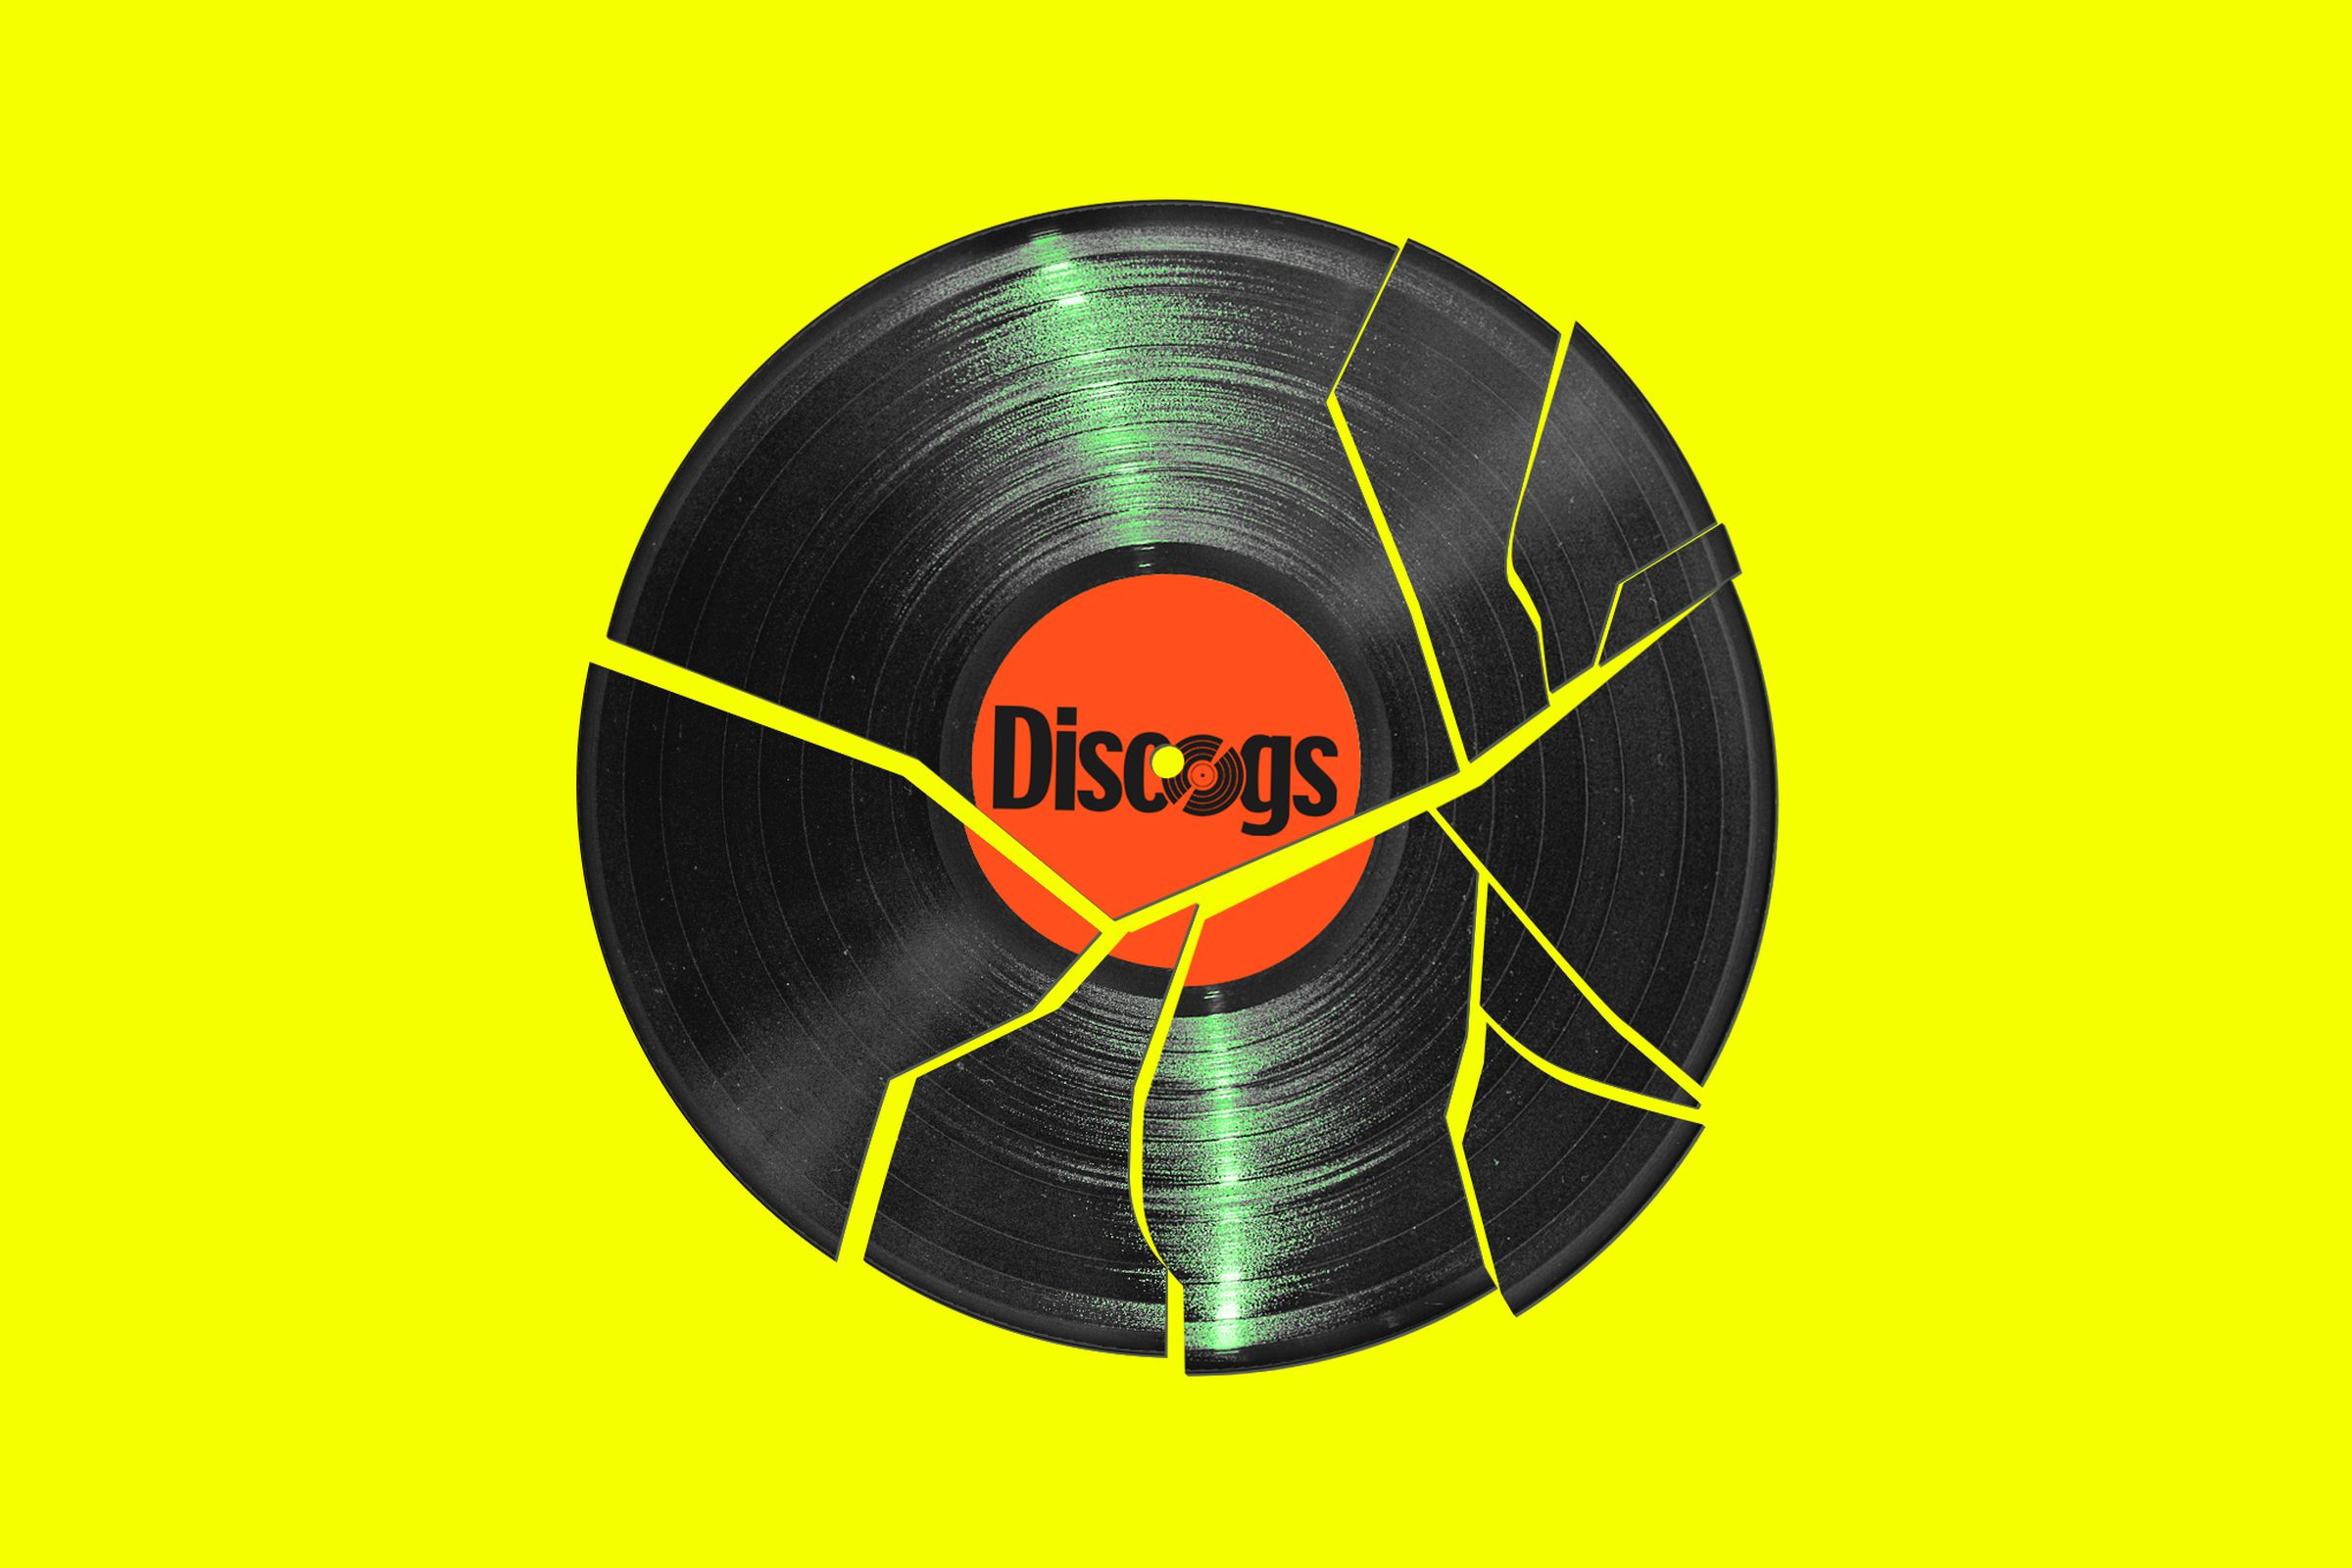 Photo illustration of a broken vinyl record with the Discogs logo.